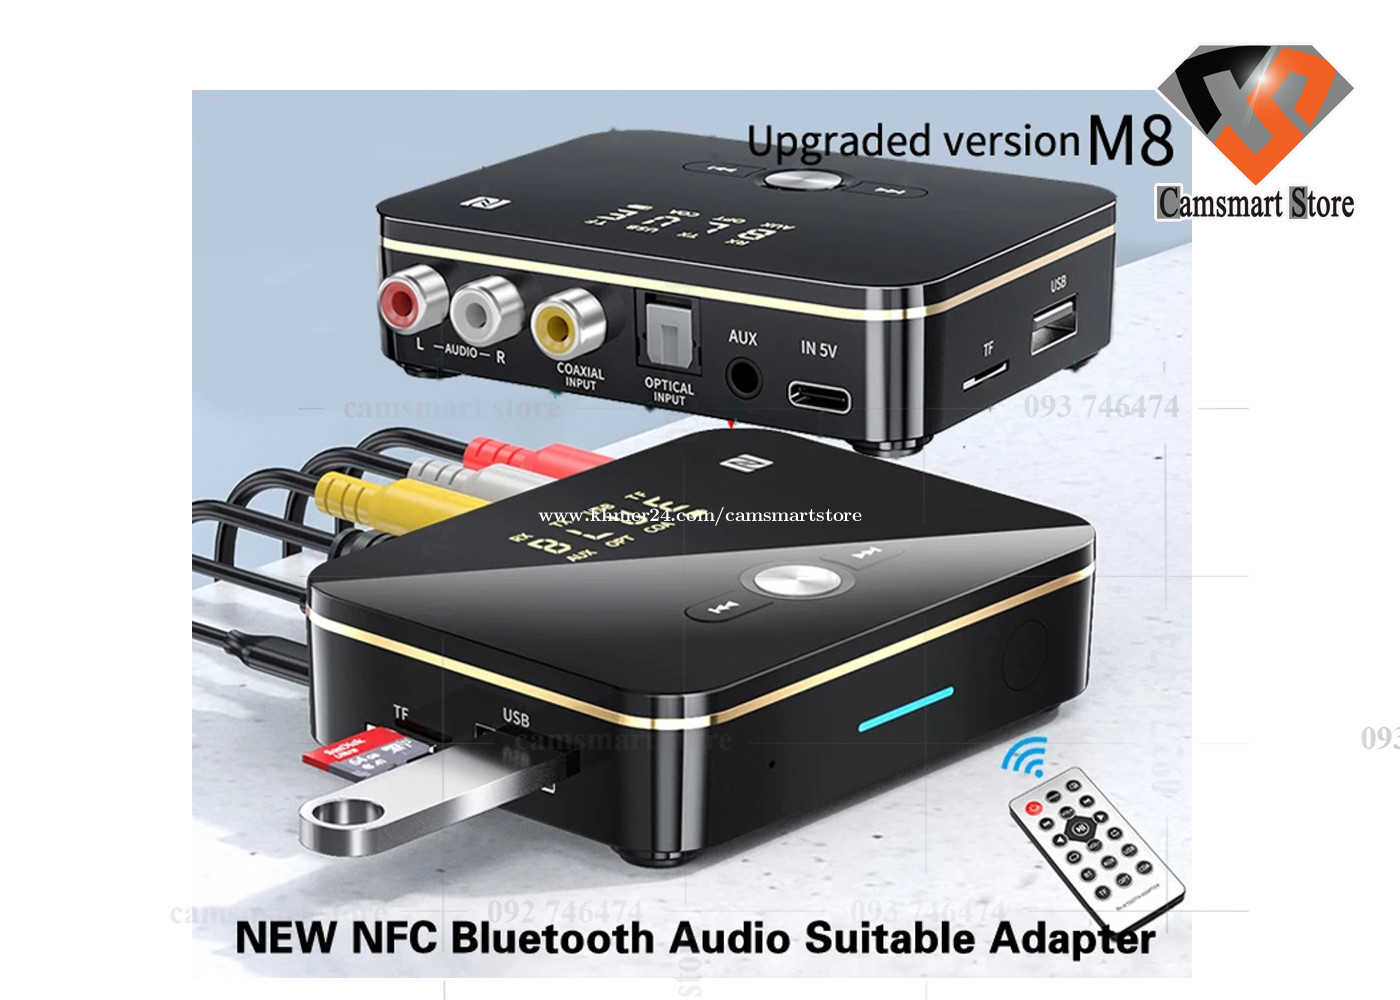 3in1 Bluetooth audio adapter multiplier/AUX input :: Warning